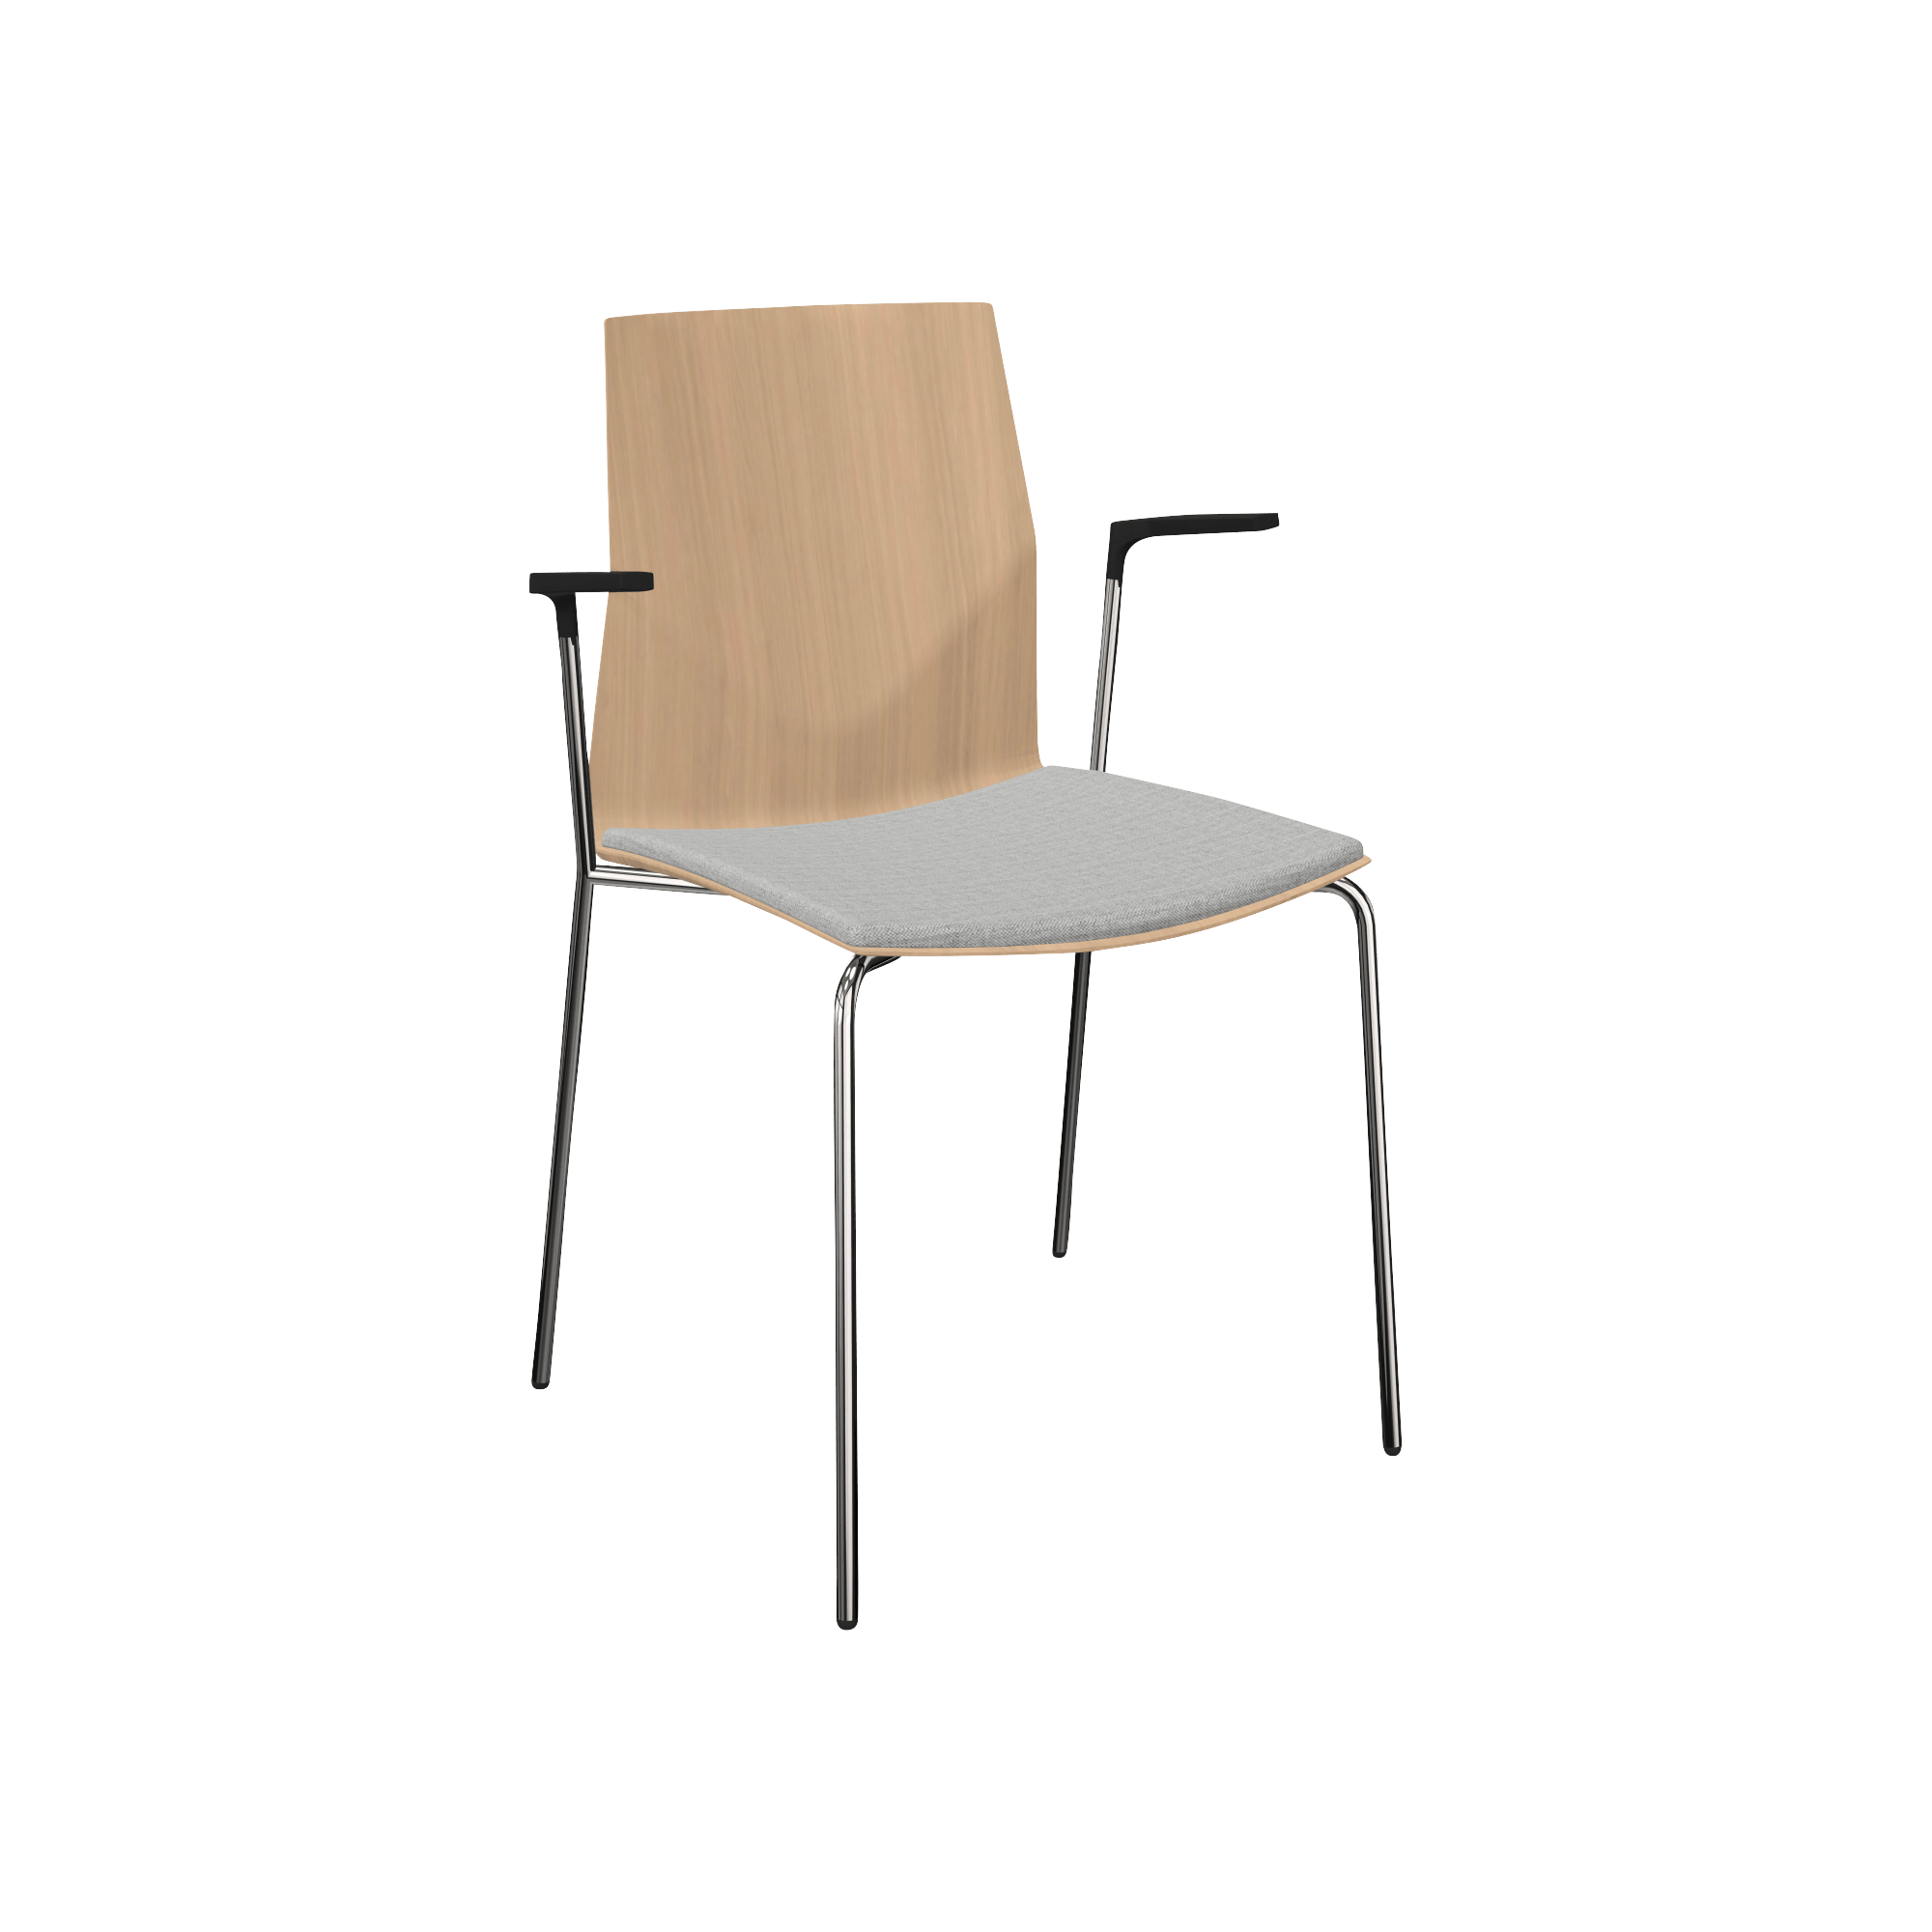 wooden designer office chair with metal legs